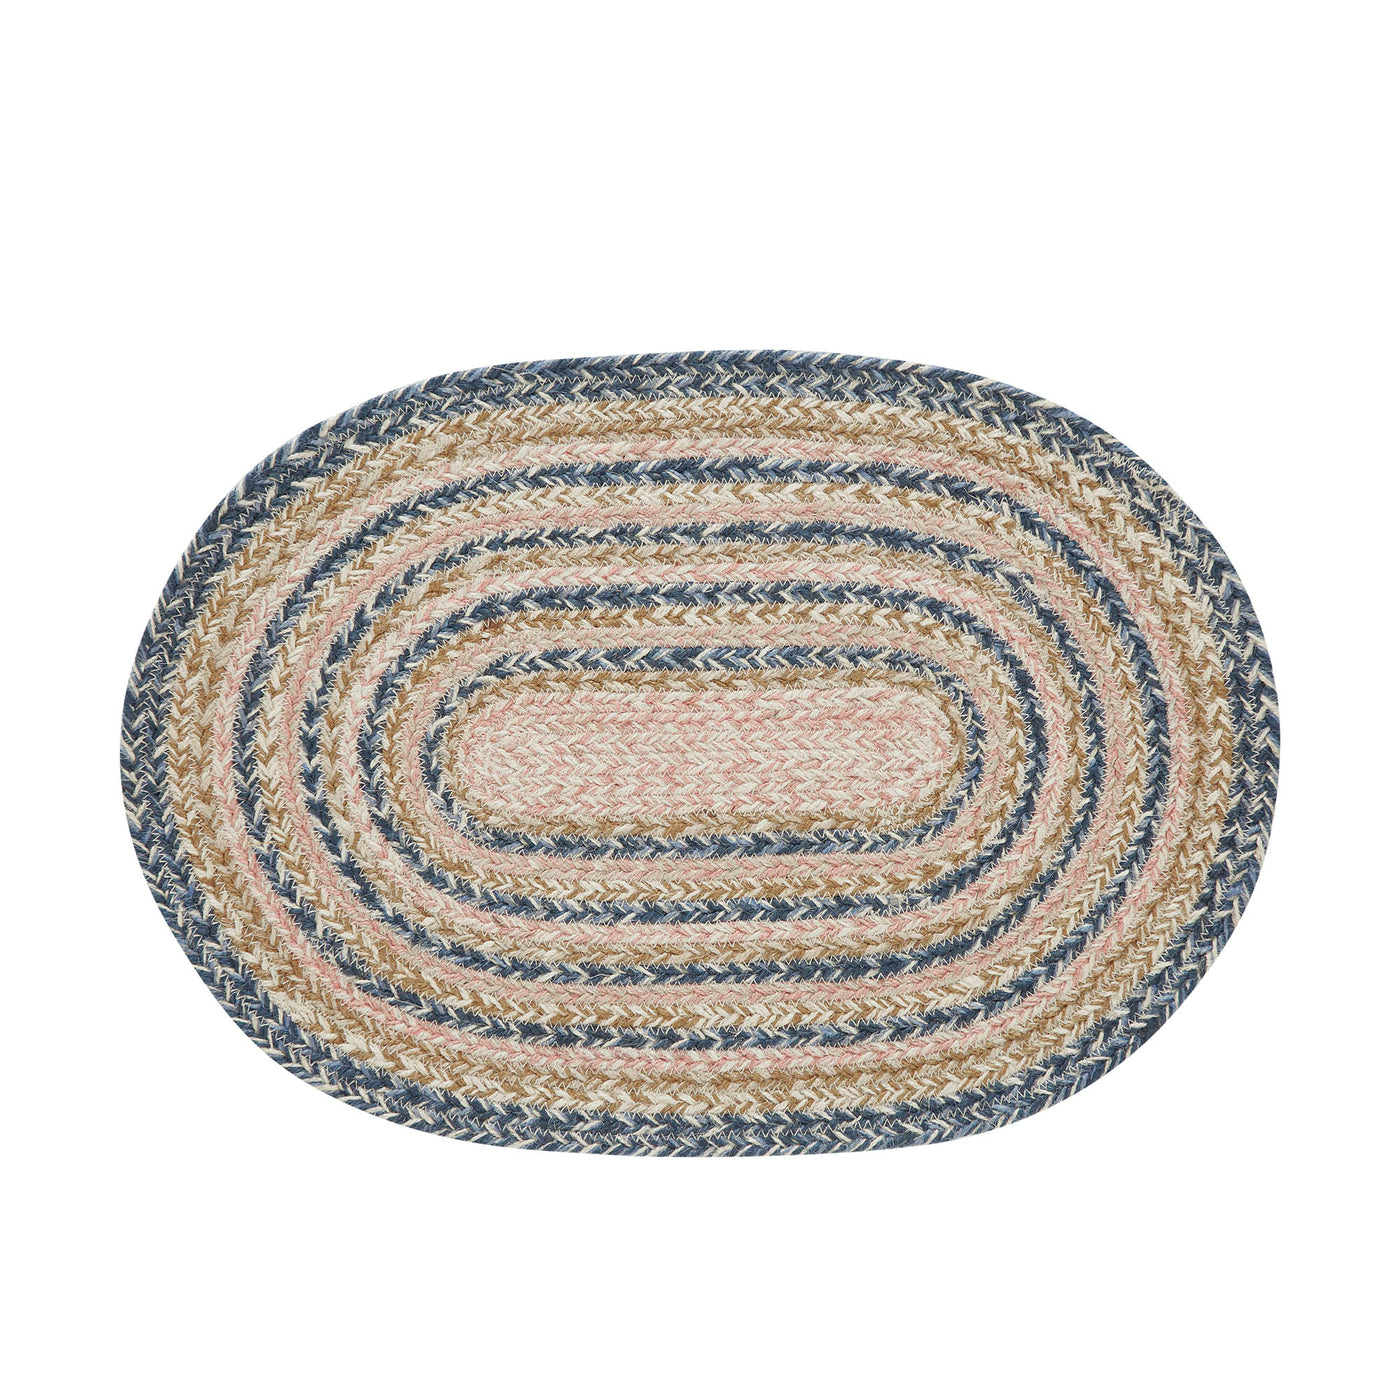 💙 Kaila Jute Oval Placemat 13'' x 19''